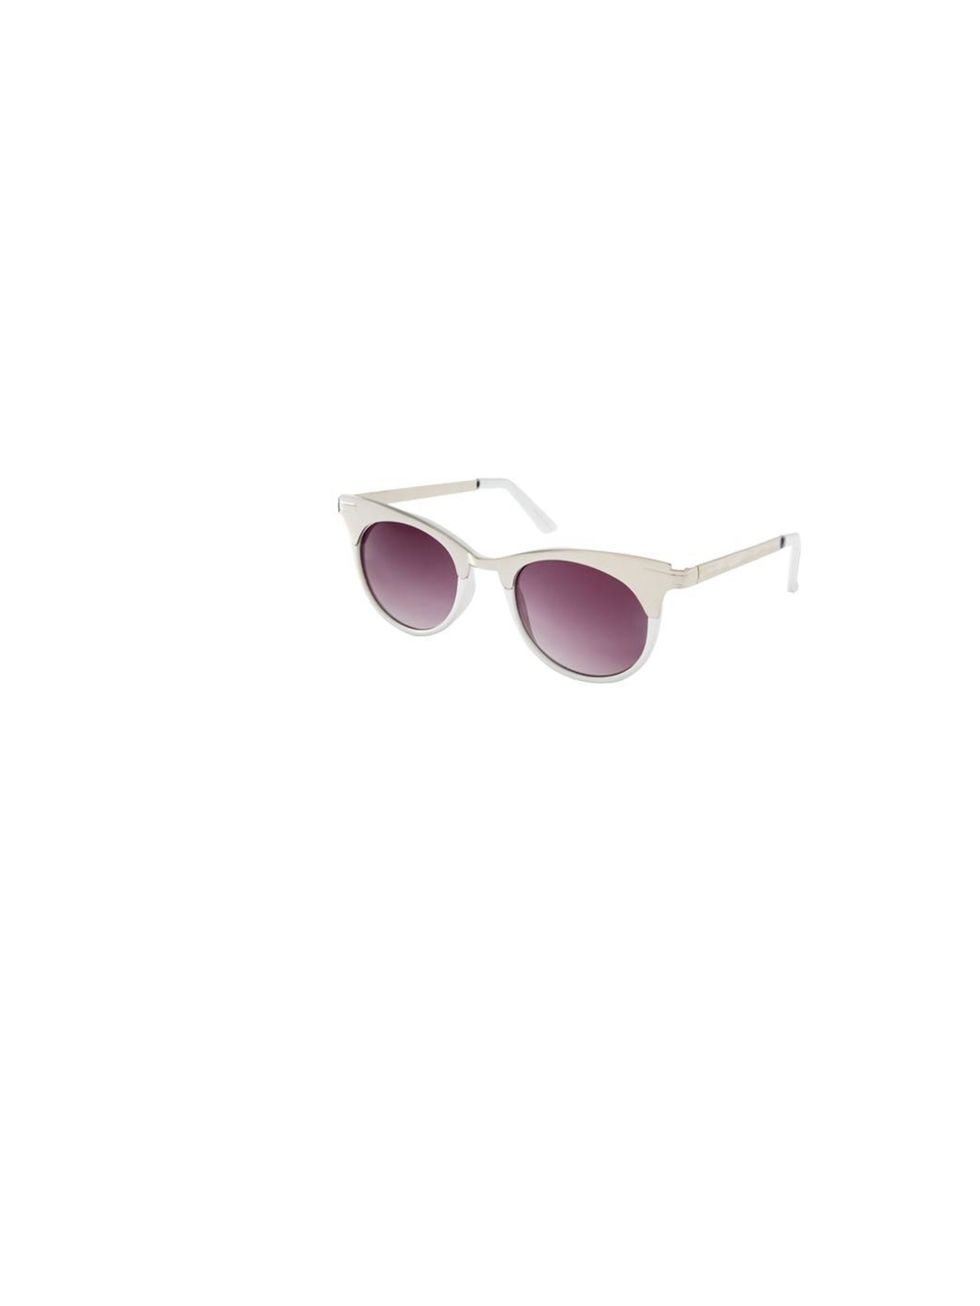 <p>The sun is finally shining again so statement shades are a must and weve got our eye on these from <a href="http://www.asos.com/ASOS/ASOS-Metal-Top-Cat-Eye-Sunglasses/Prod/pgeproduct.aspx?iid=2884359&amp;cid=6992&amp;Rf900=1589&amp;sh=0&amp;pge=0&amp;